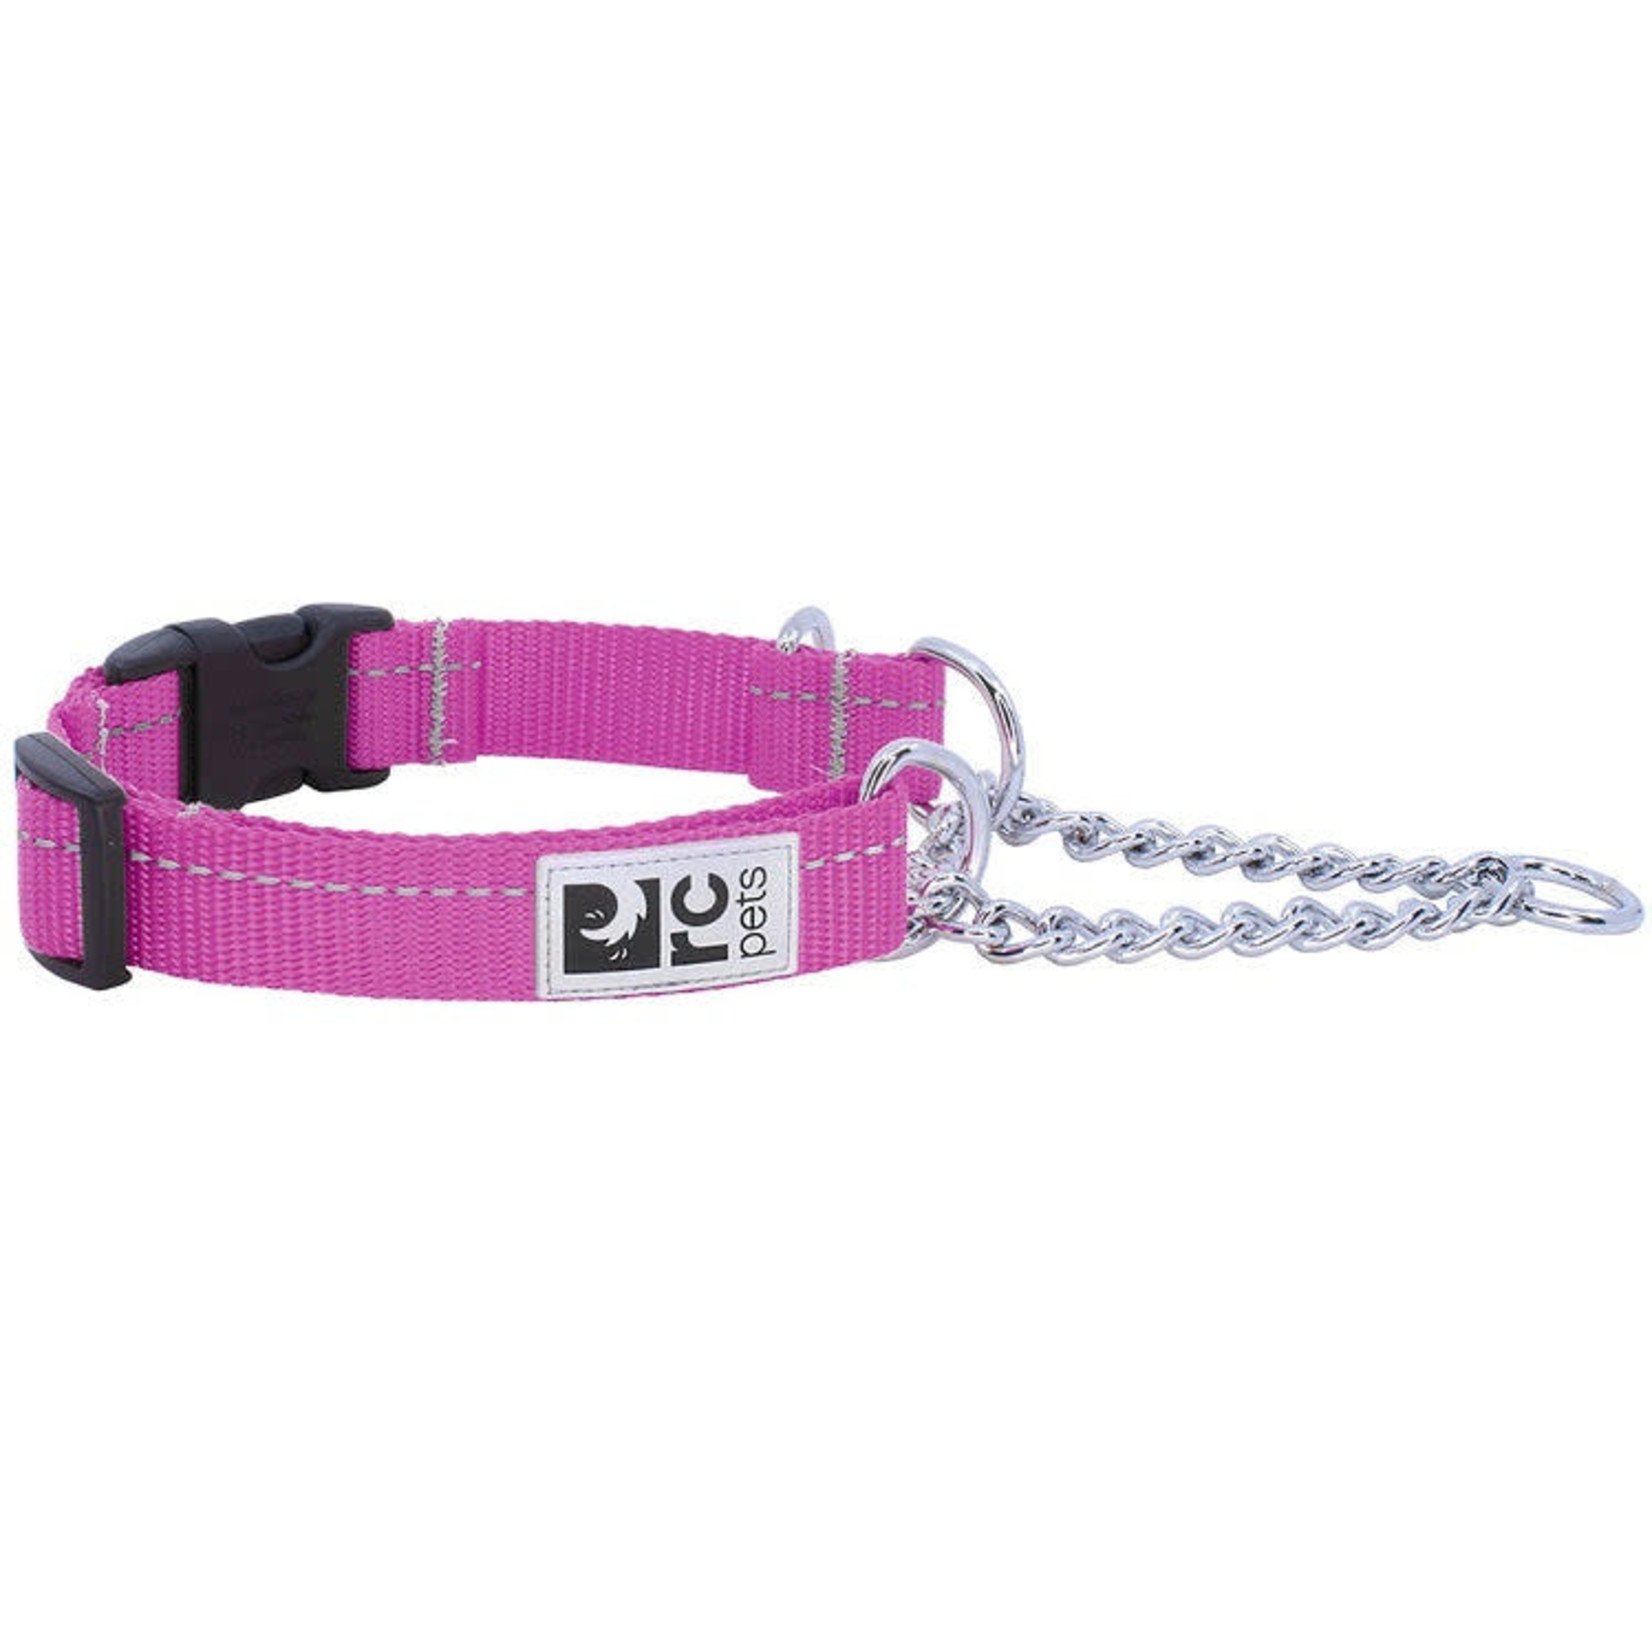 RC PETS Training Clip Collar Primary L 1 Mulberry